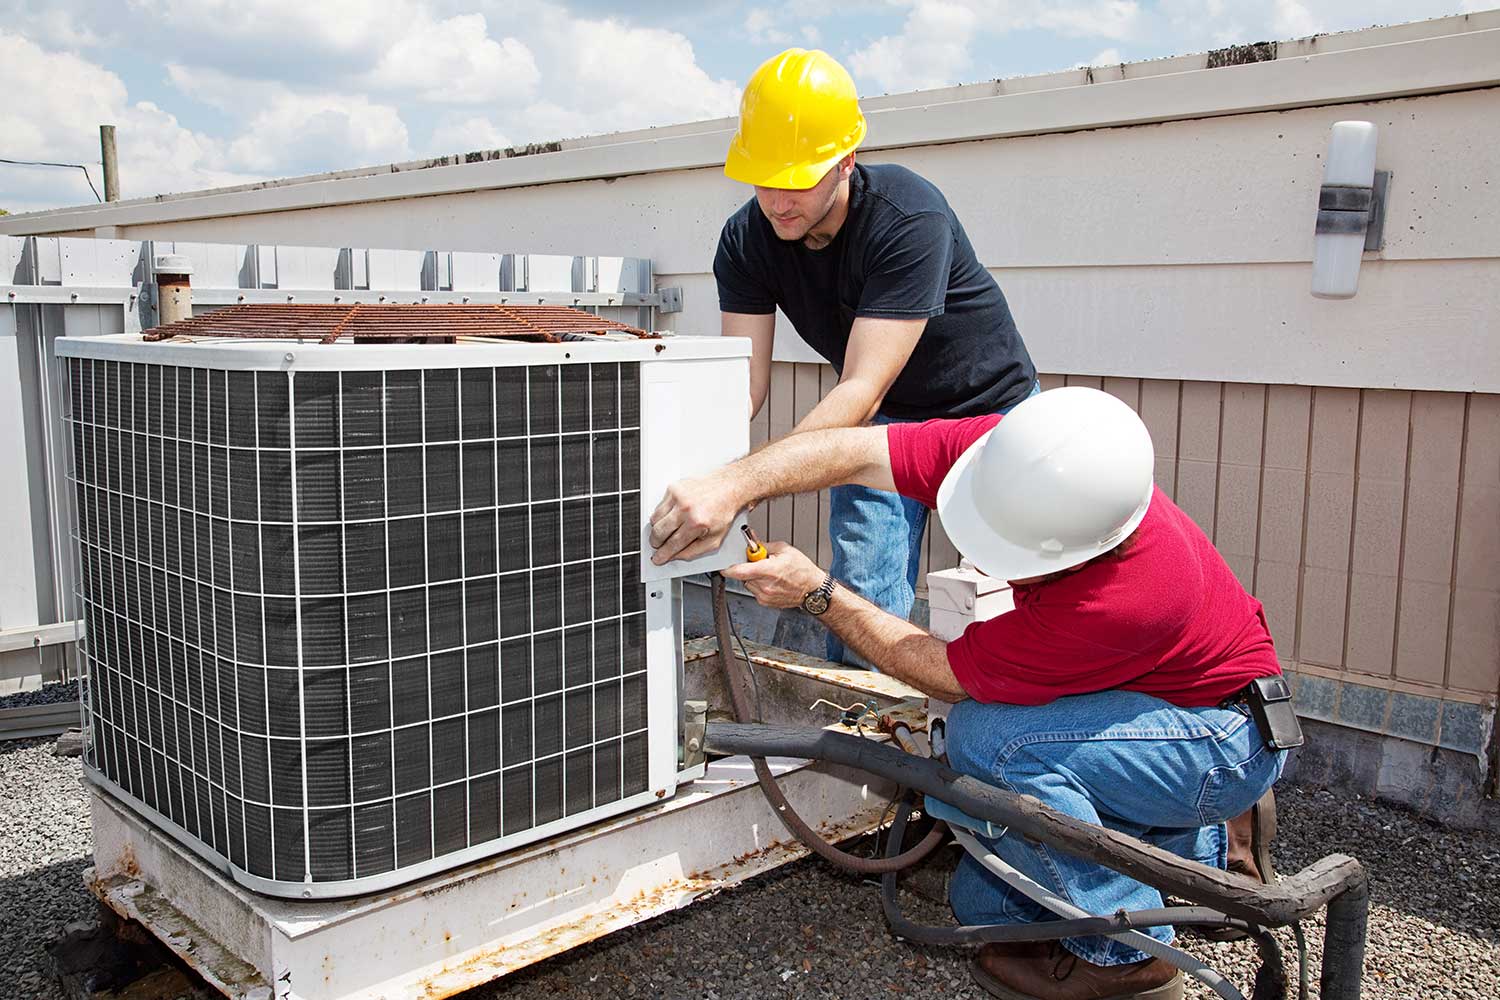 Avoid an Heating plus Air Conditioning breakdown by keeping your apartment insulated